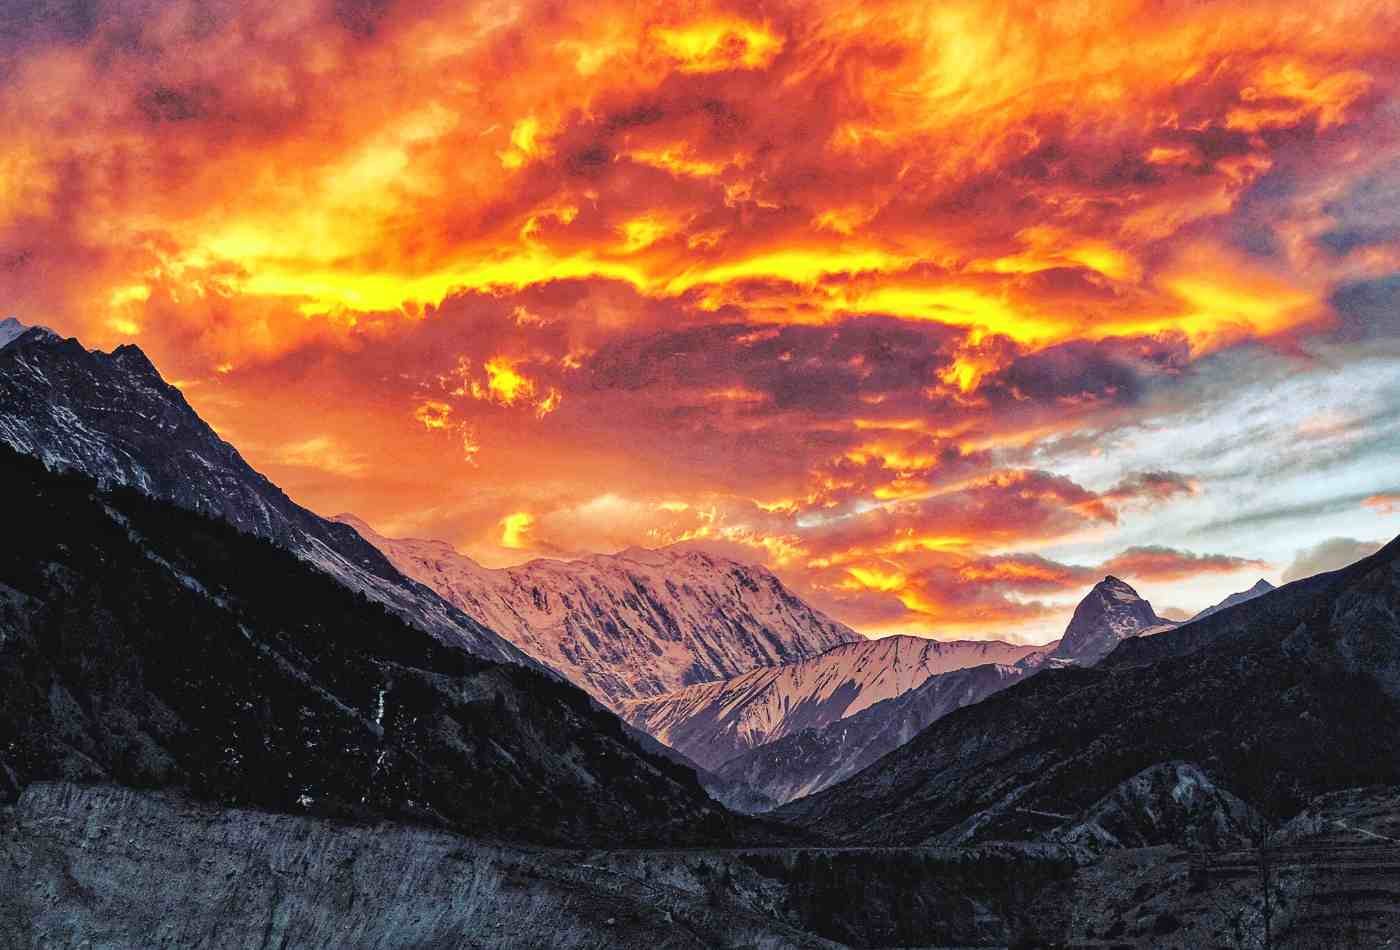 A breathtaking view of Tilicho Peak (7,134m), stands majestically in the background, with its summit bathed in warm orange clouds. 